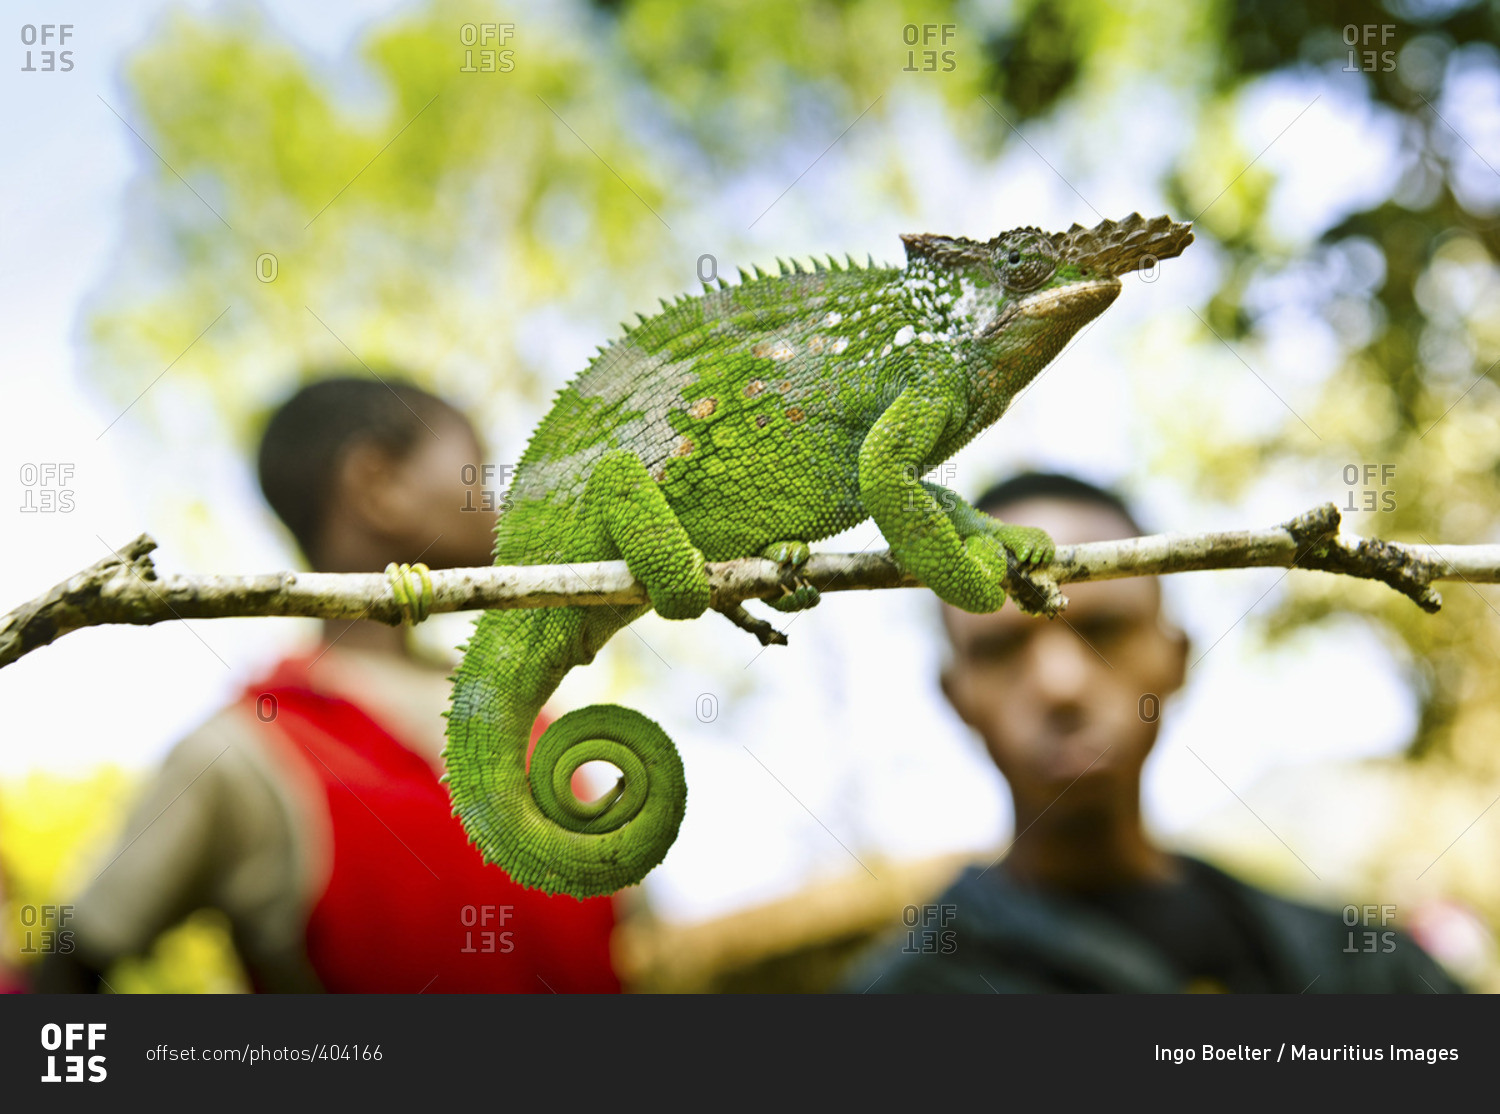 A big horned chameleon perched on a twig with blurry youth in the background